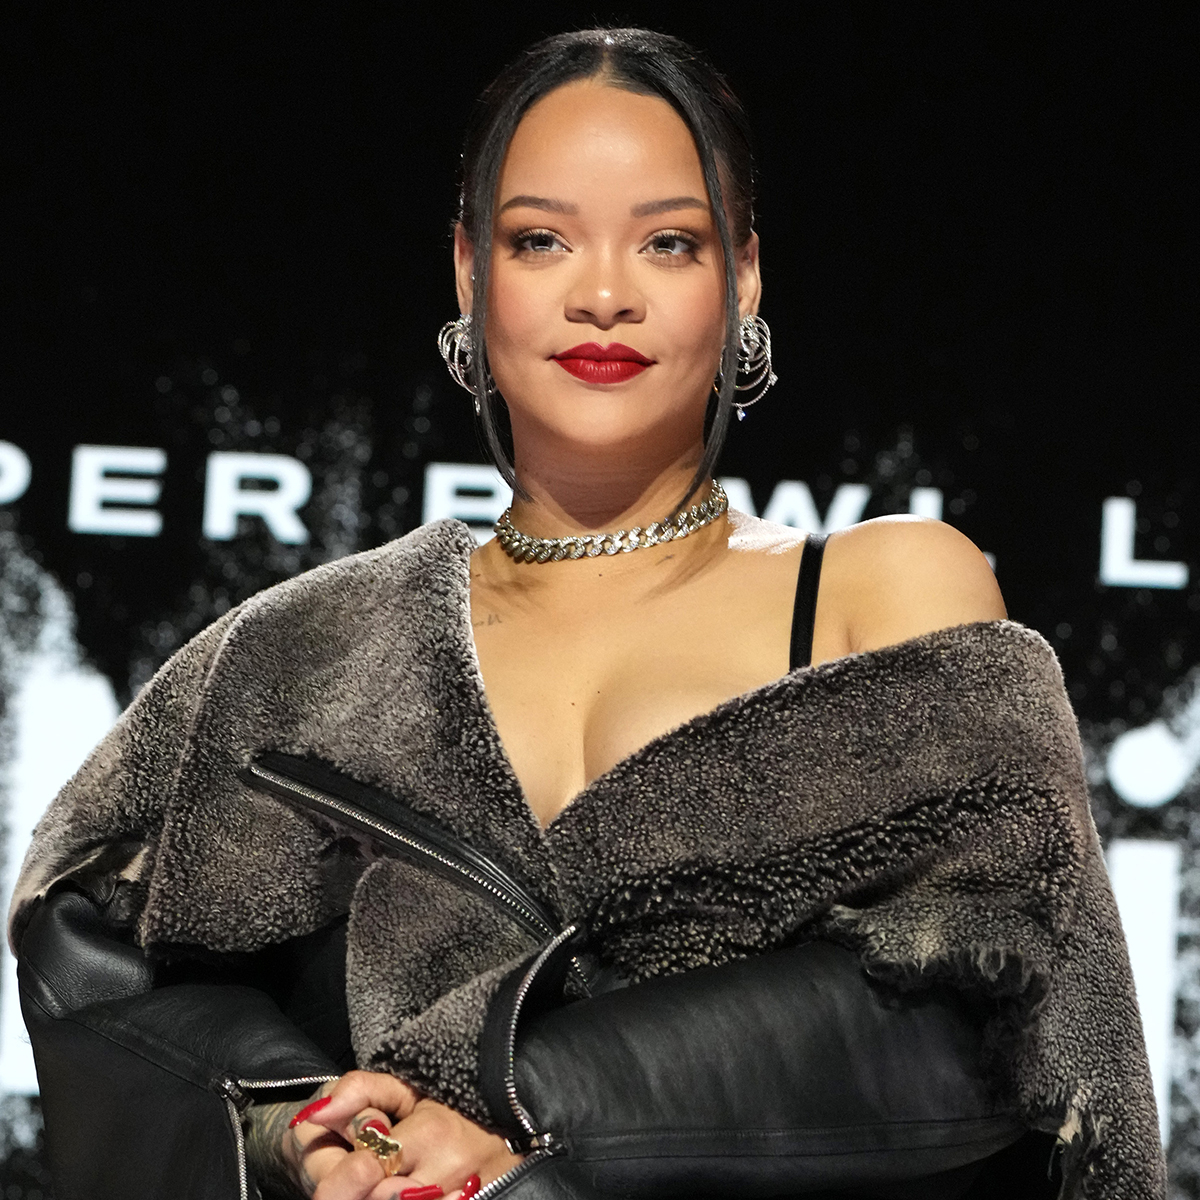 Pregnant Rihanna Shares Photo of Her Son in Tears After He Learned His Sibling Gets to Go to the Oscars – E! Online